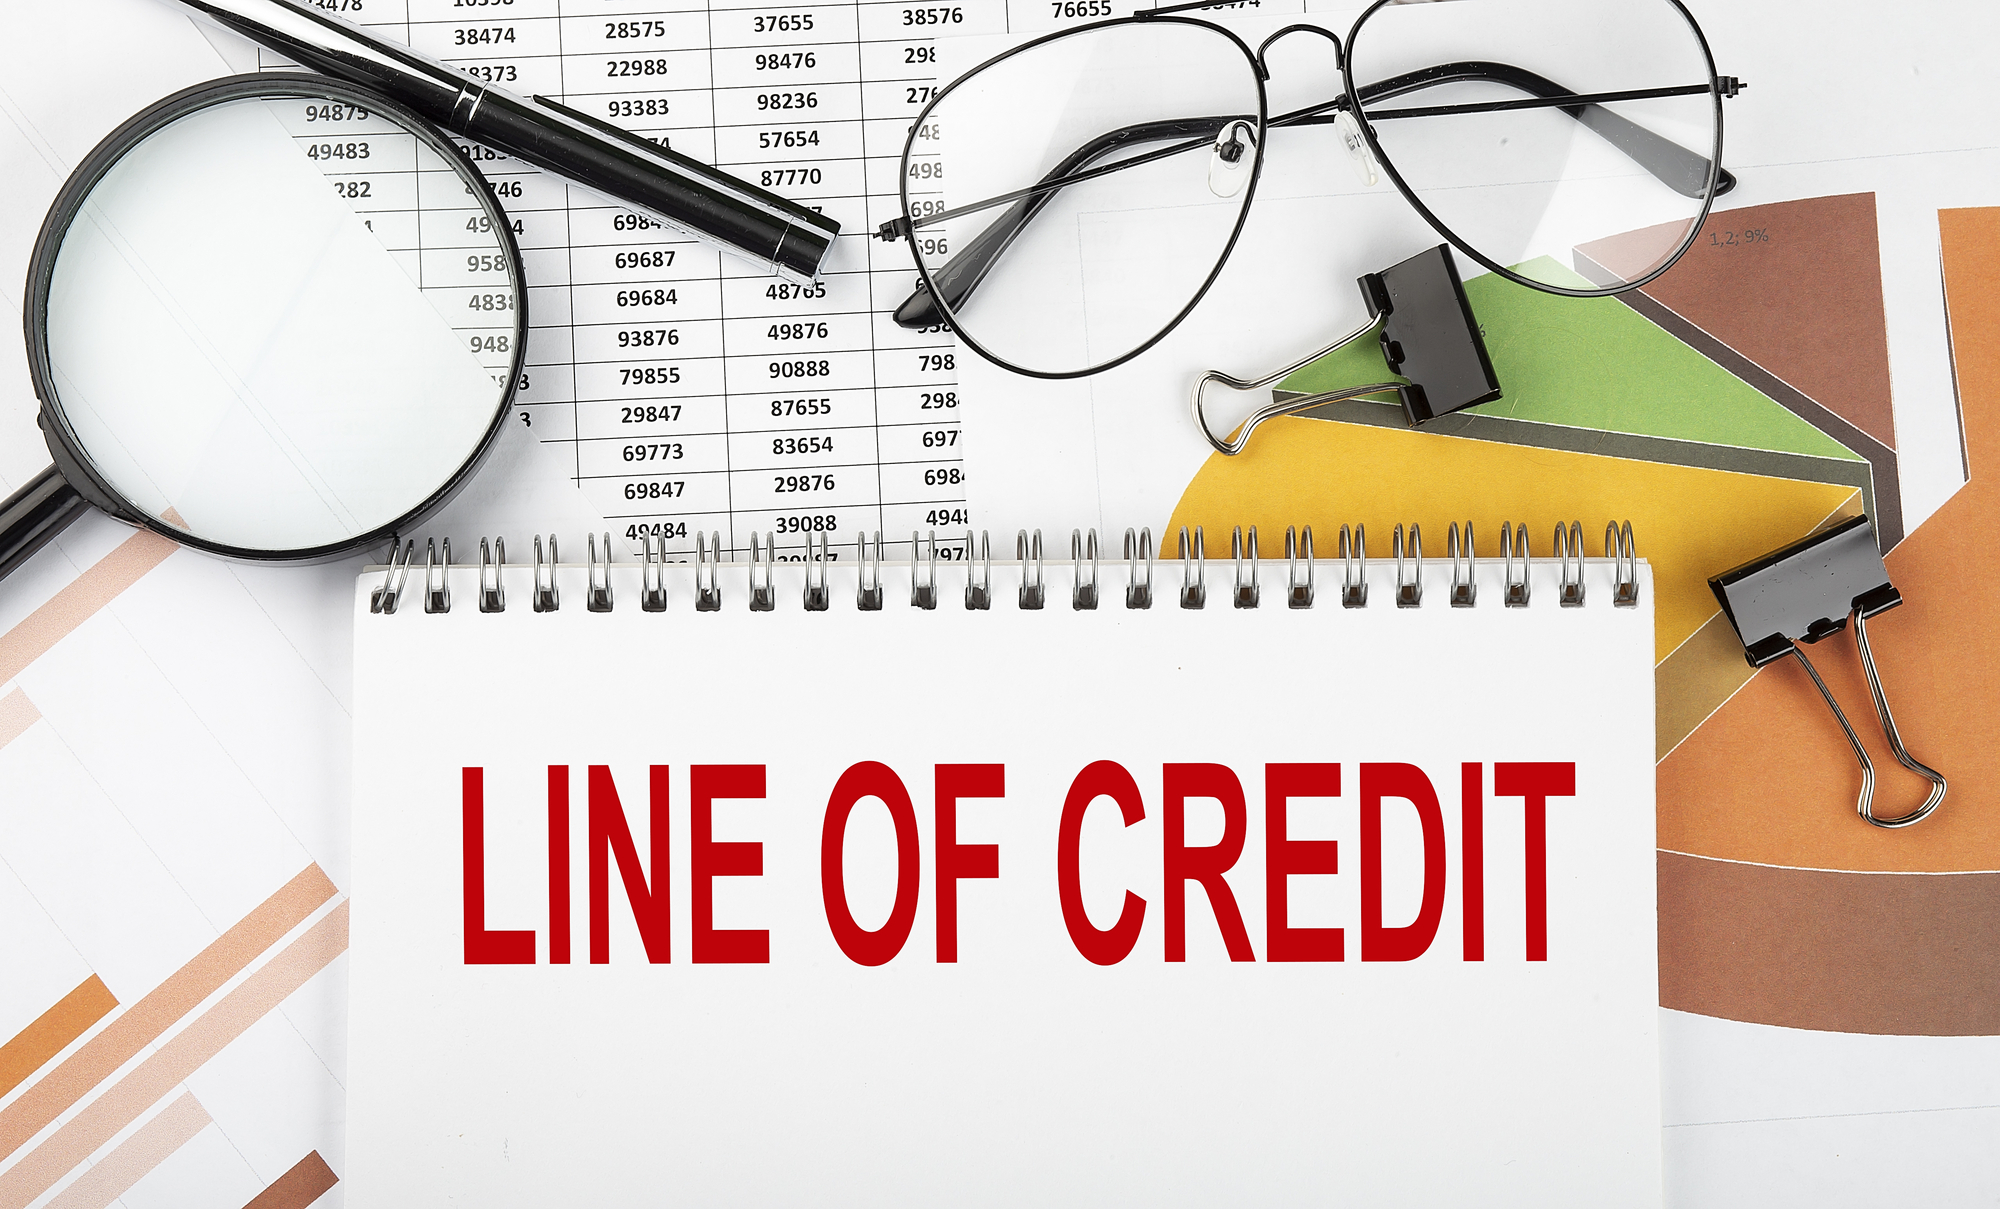 Reasons Why a Line of Credit Could Benefit Your Boutique